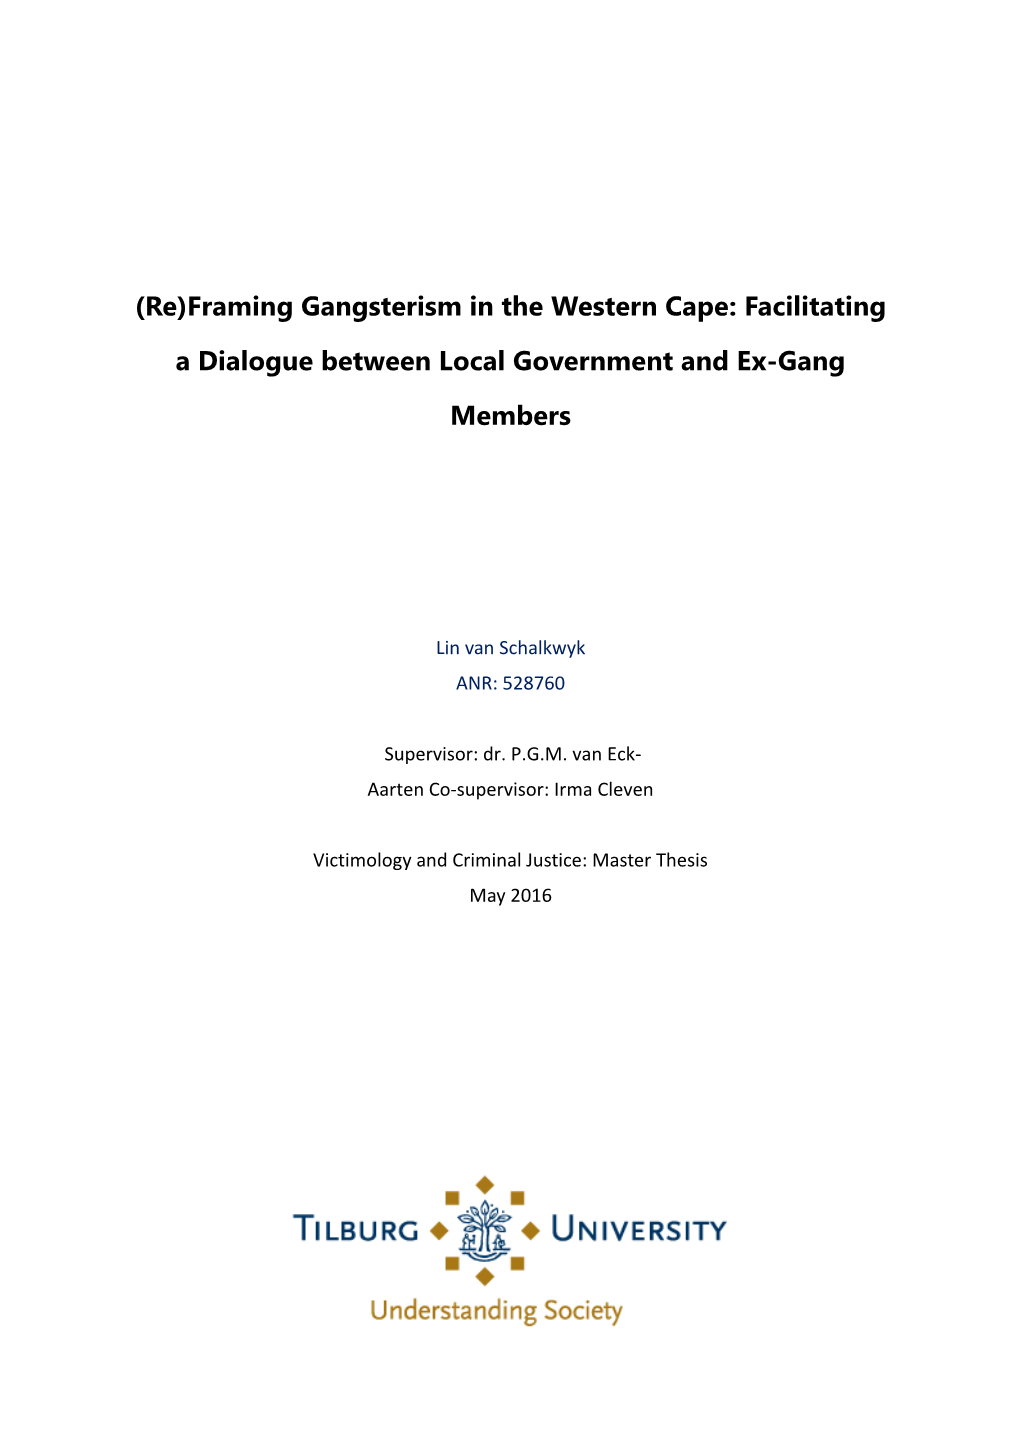 Framing Gangsterism in the Western Cape: Facilitating a Dialogue Between Local Government and Ex-Gang Members